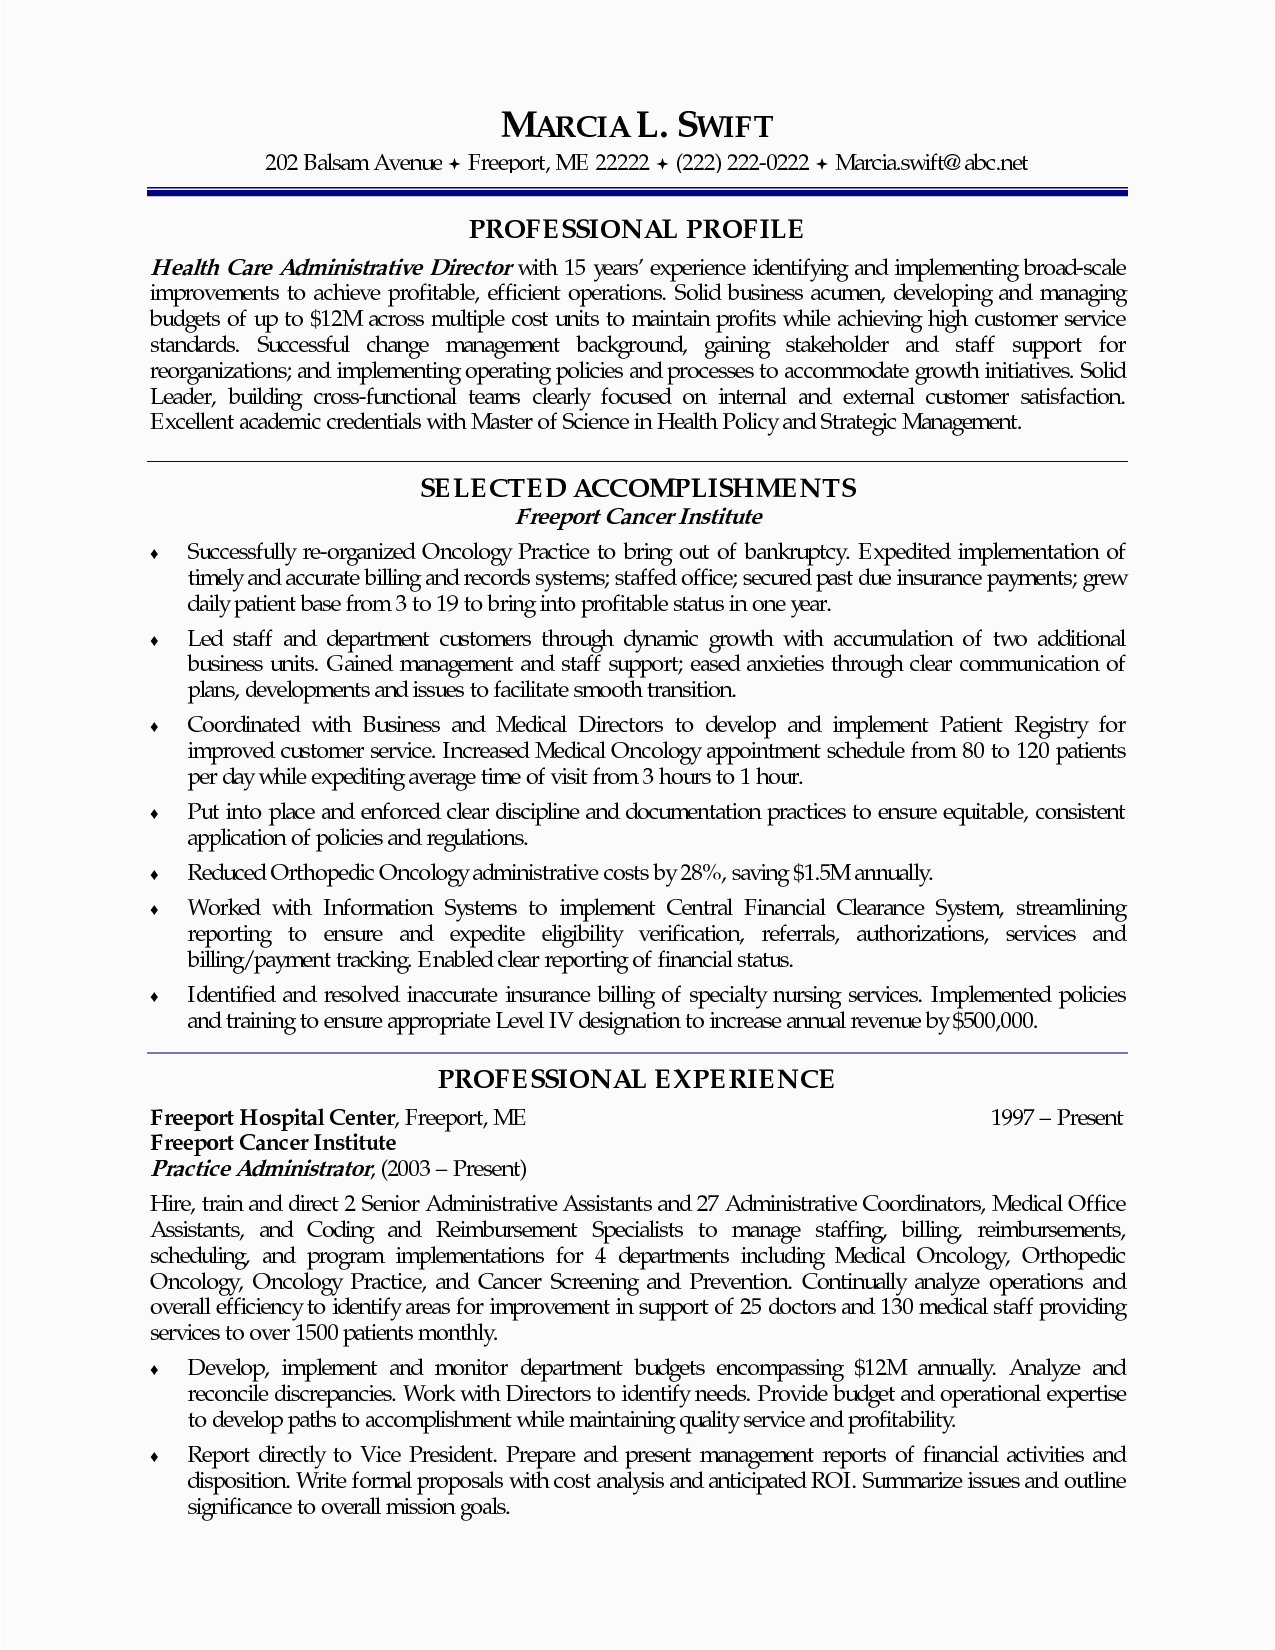 Dietary Aide Resume Sample No Experience Dietary Aide Resume Sample No Experience Bank Of Resume